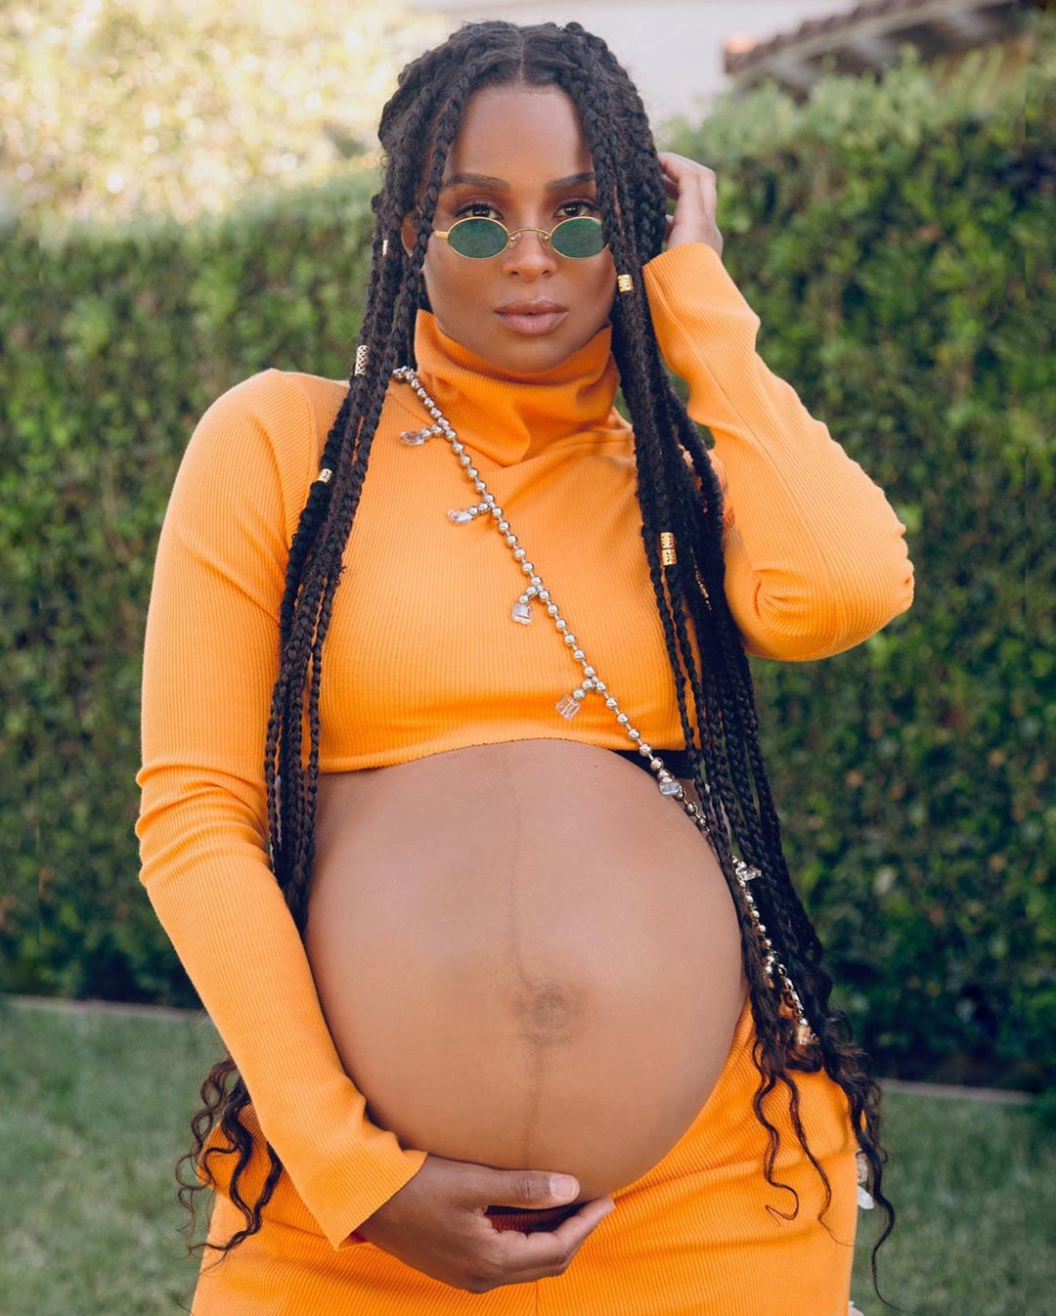 Once Again, Ciara Is Slaying Her Pregnancy Looks